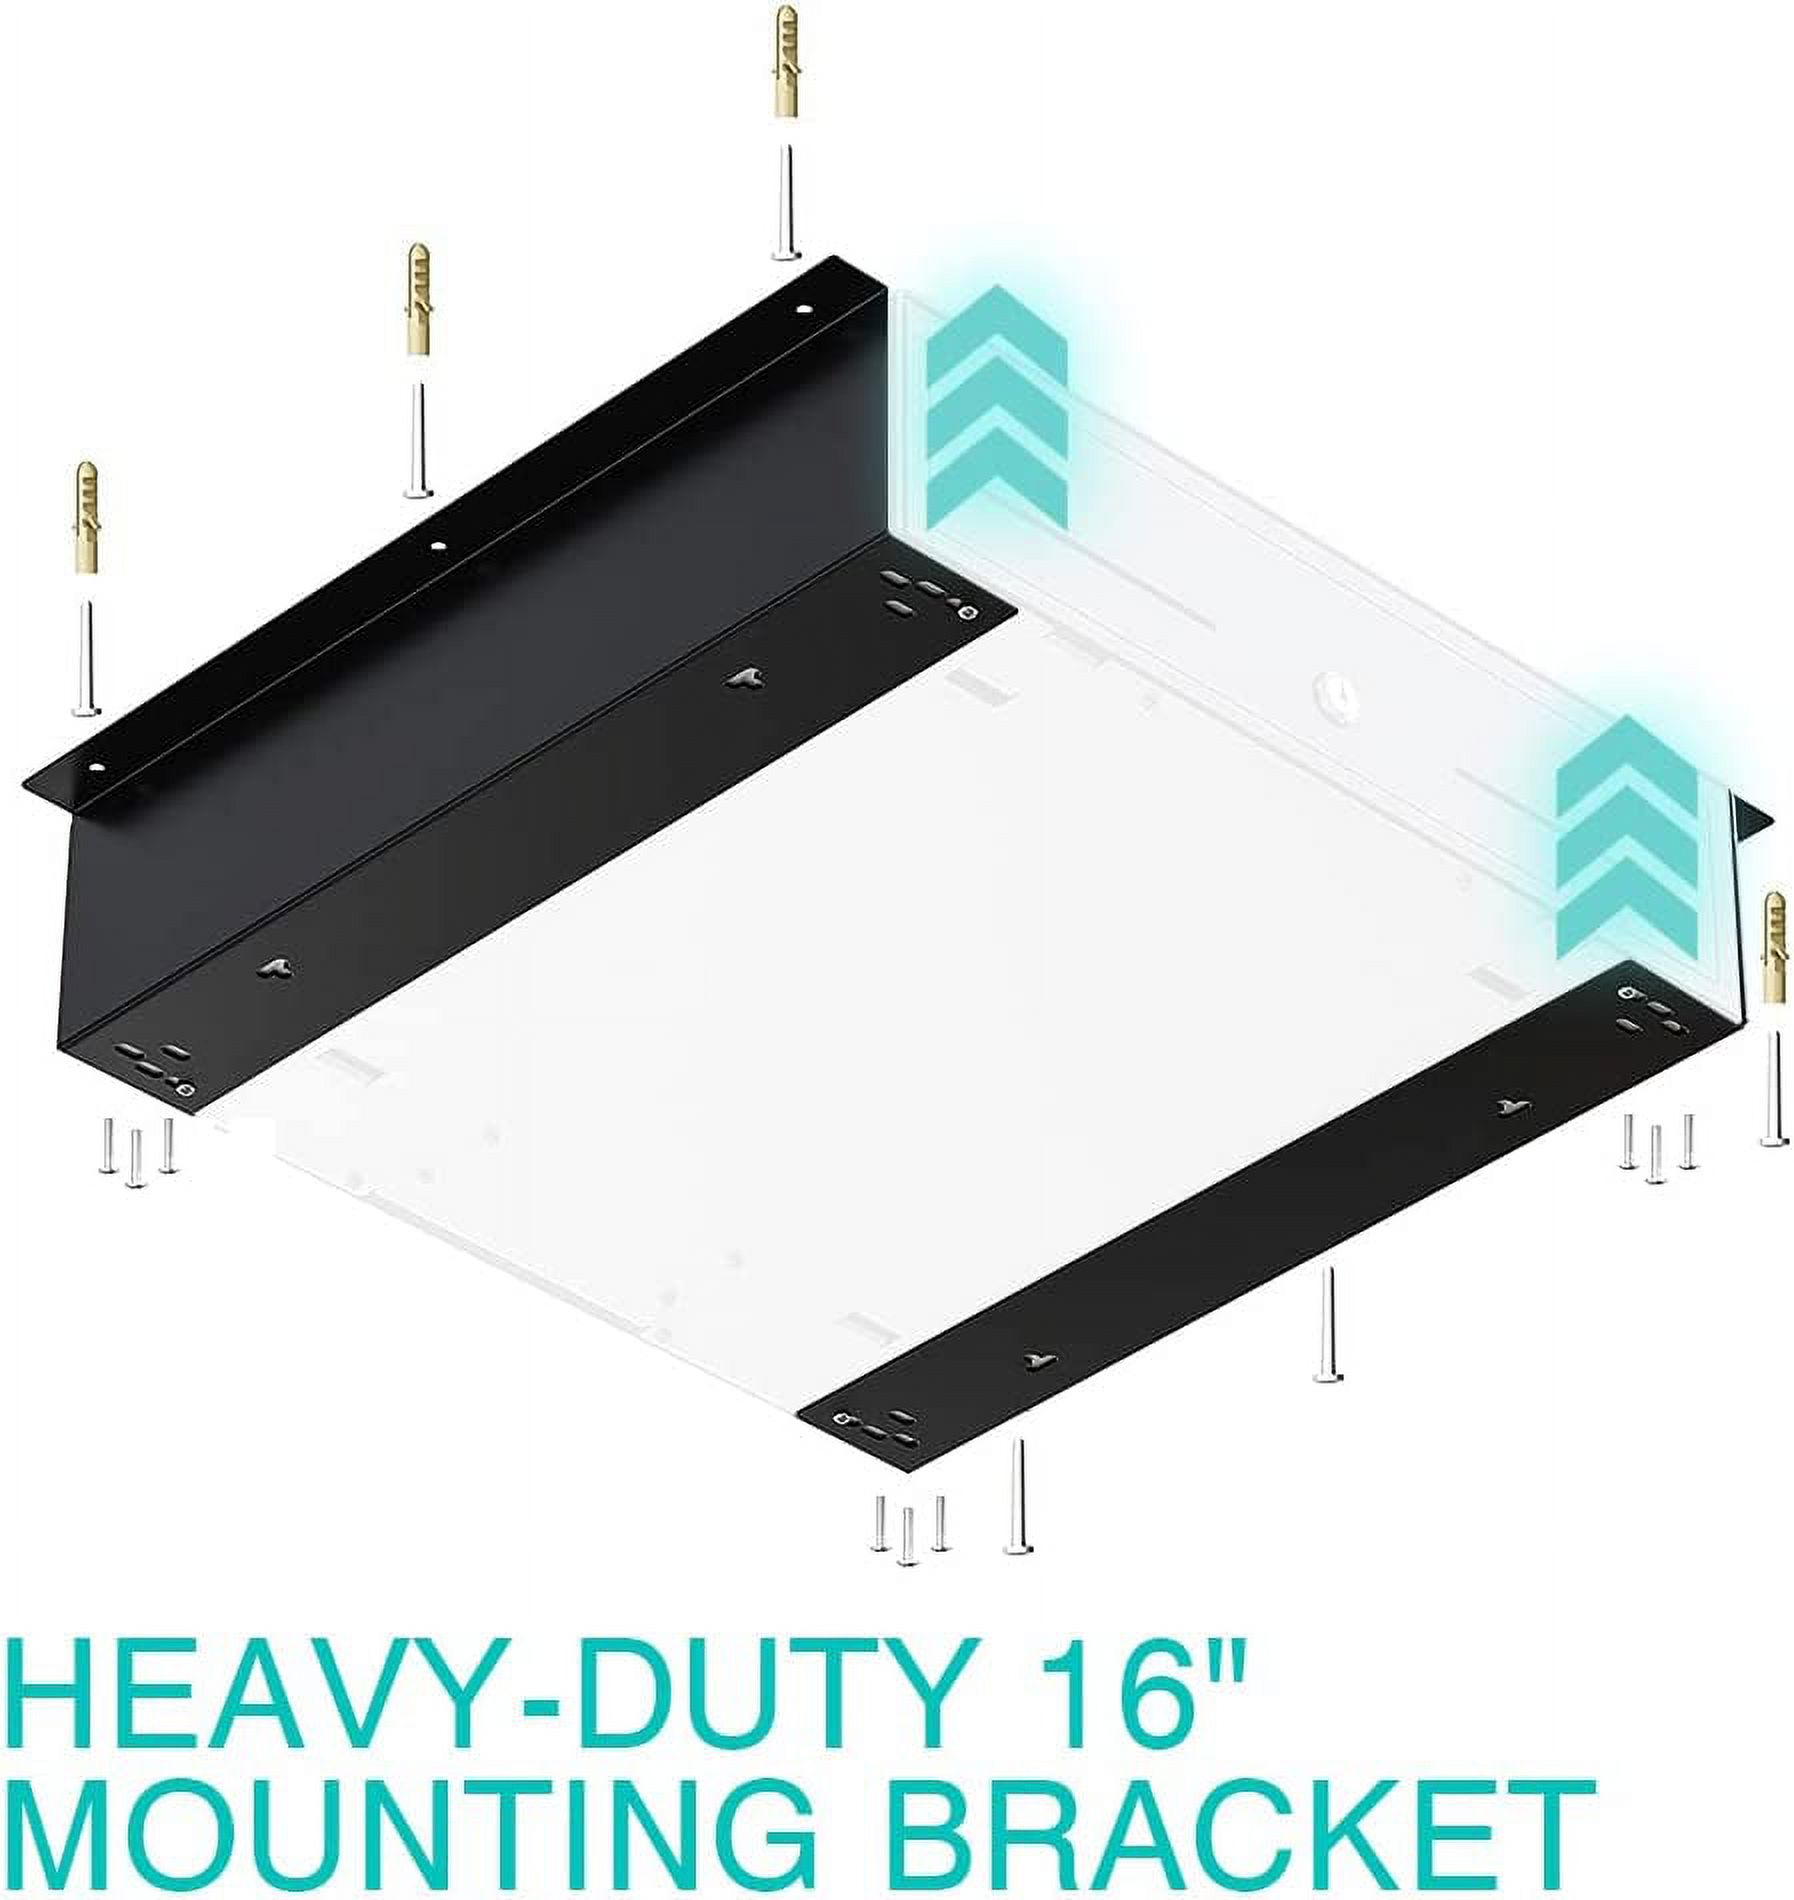 Skywin Under Counter Mounting Brackets - Heavy Duty Steel Mounting Brackets for Installation of 16" Cash Drawer - image 2 of 7